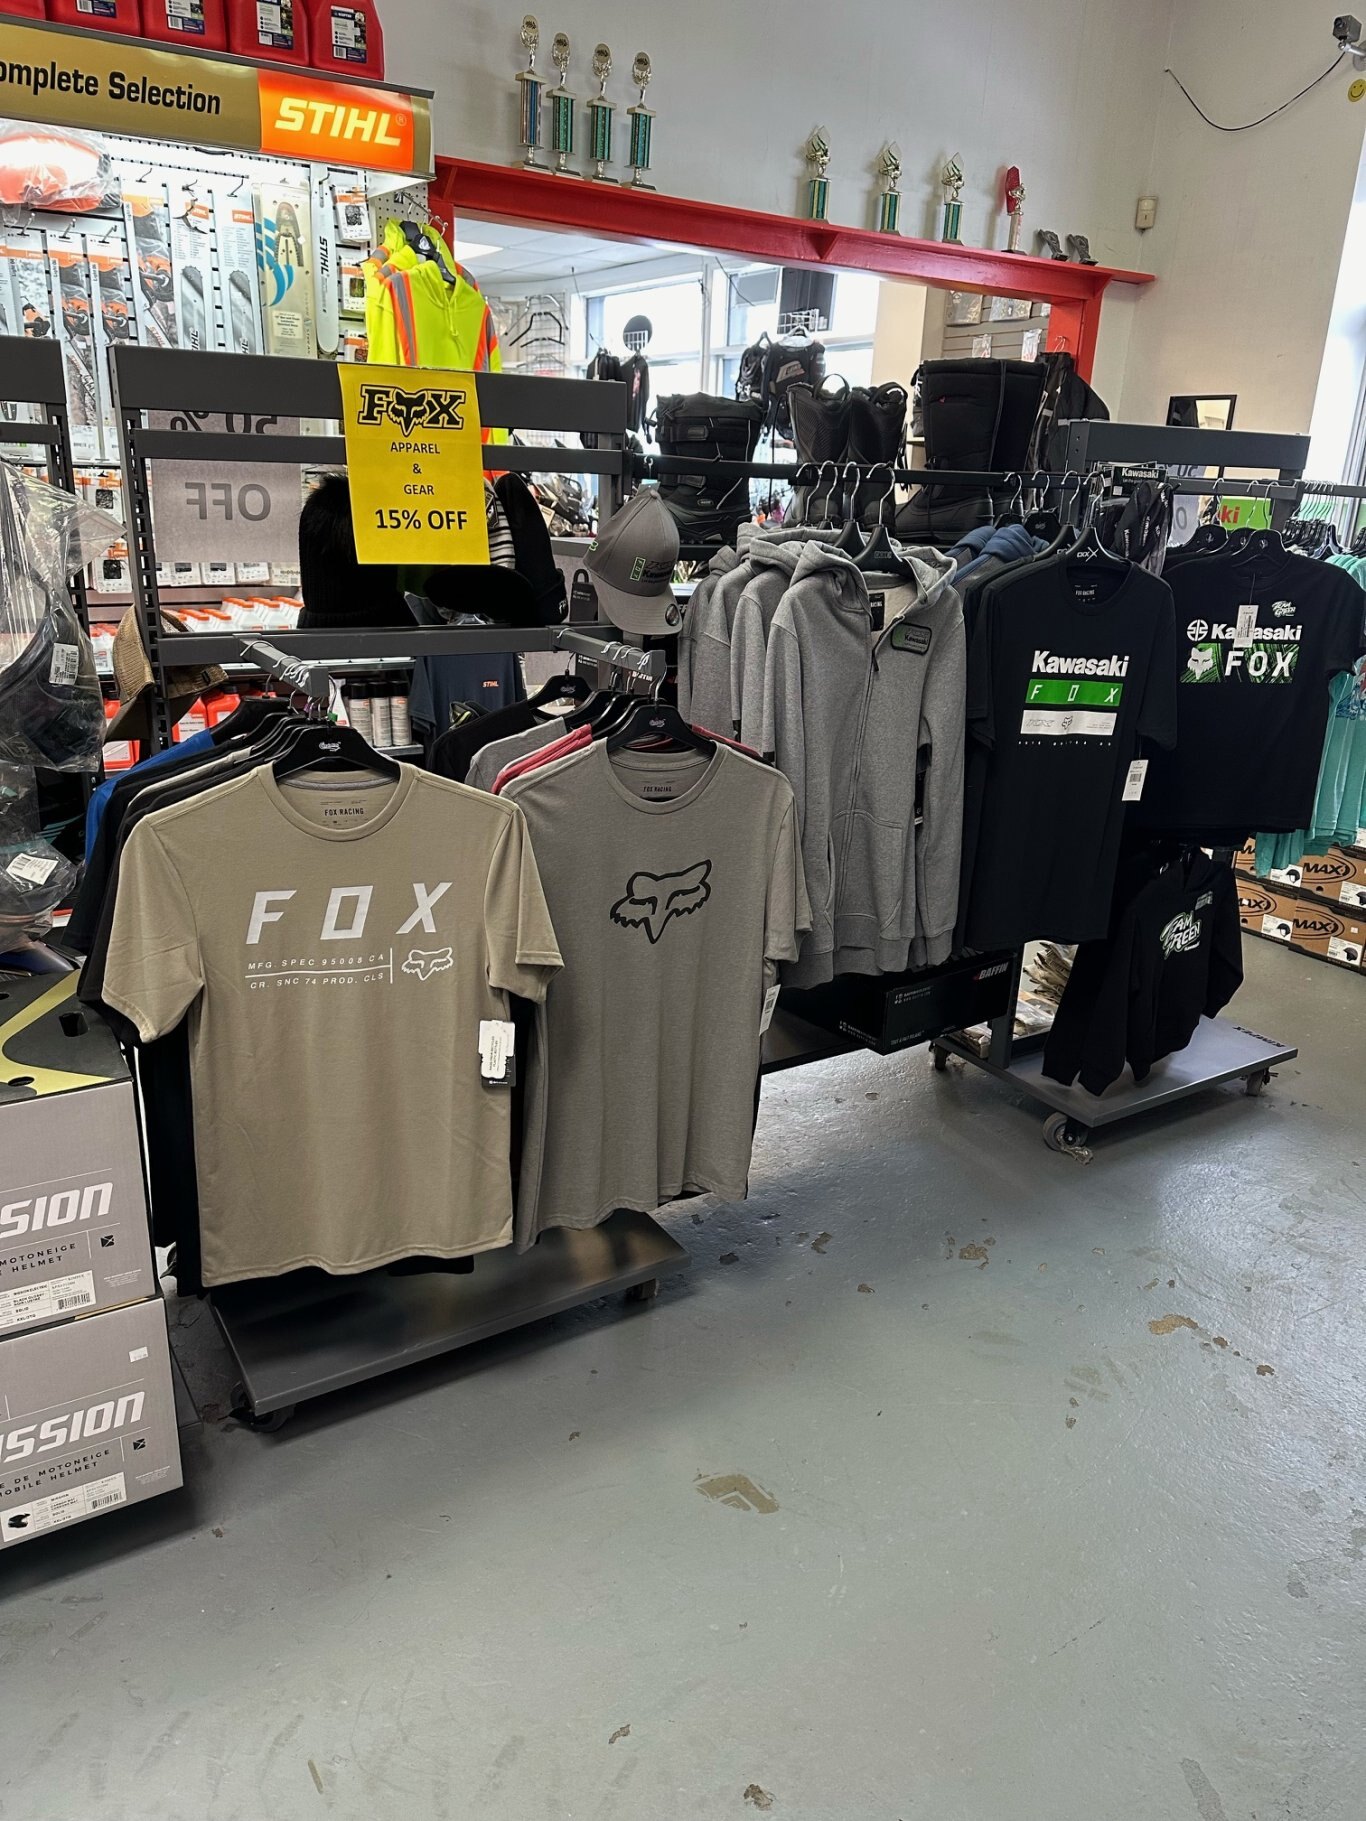 FOX CLOTHING ON SALE 20% OFF